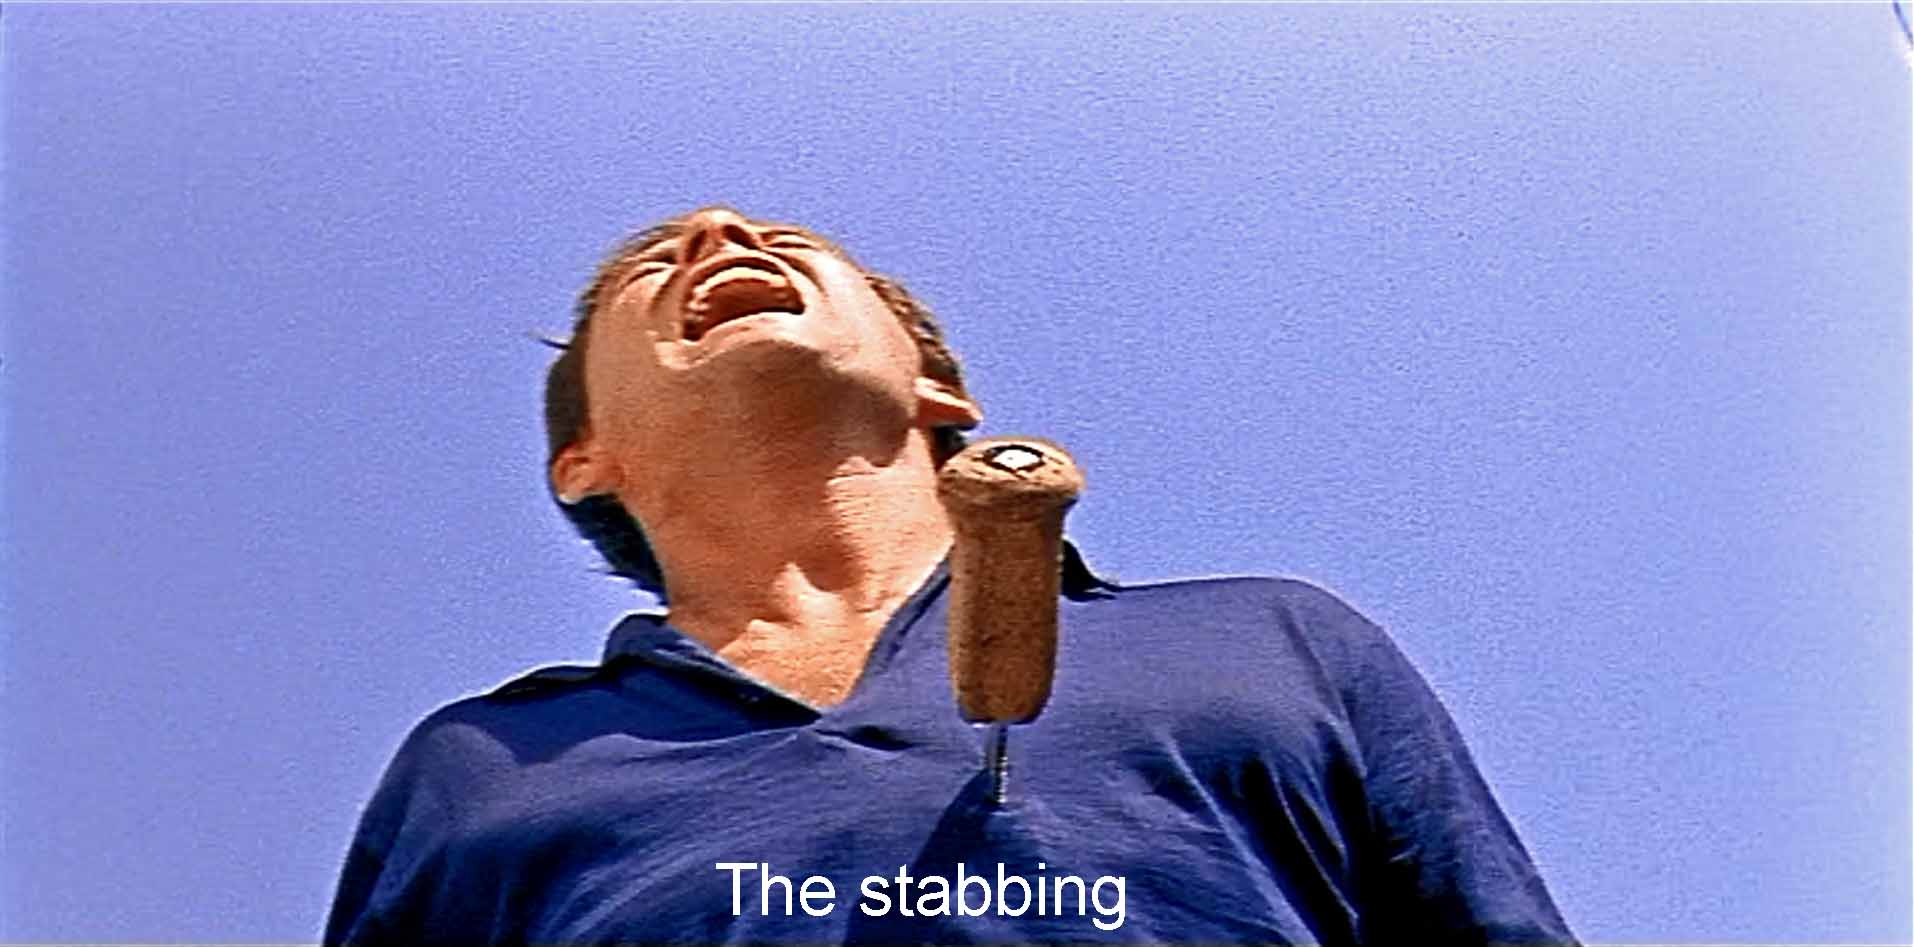 The stabbing